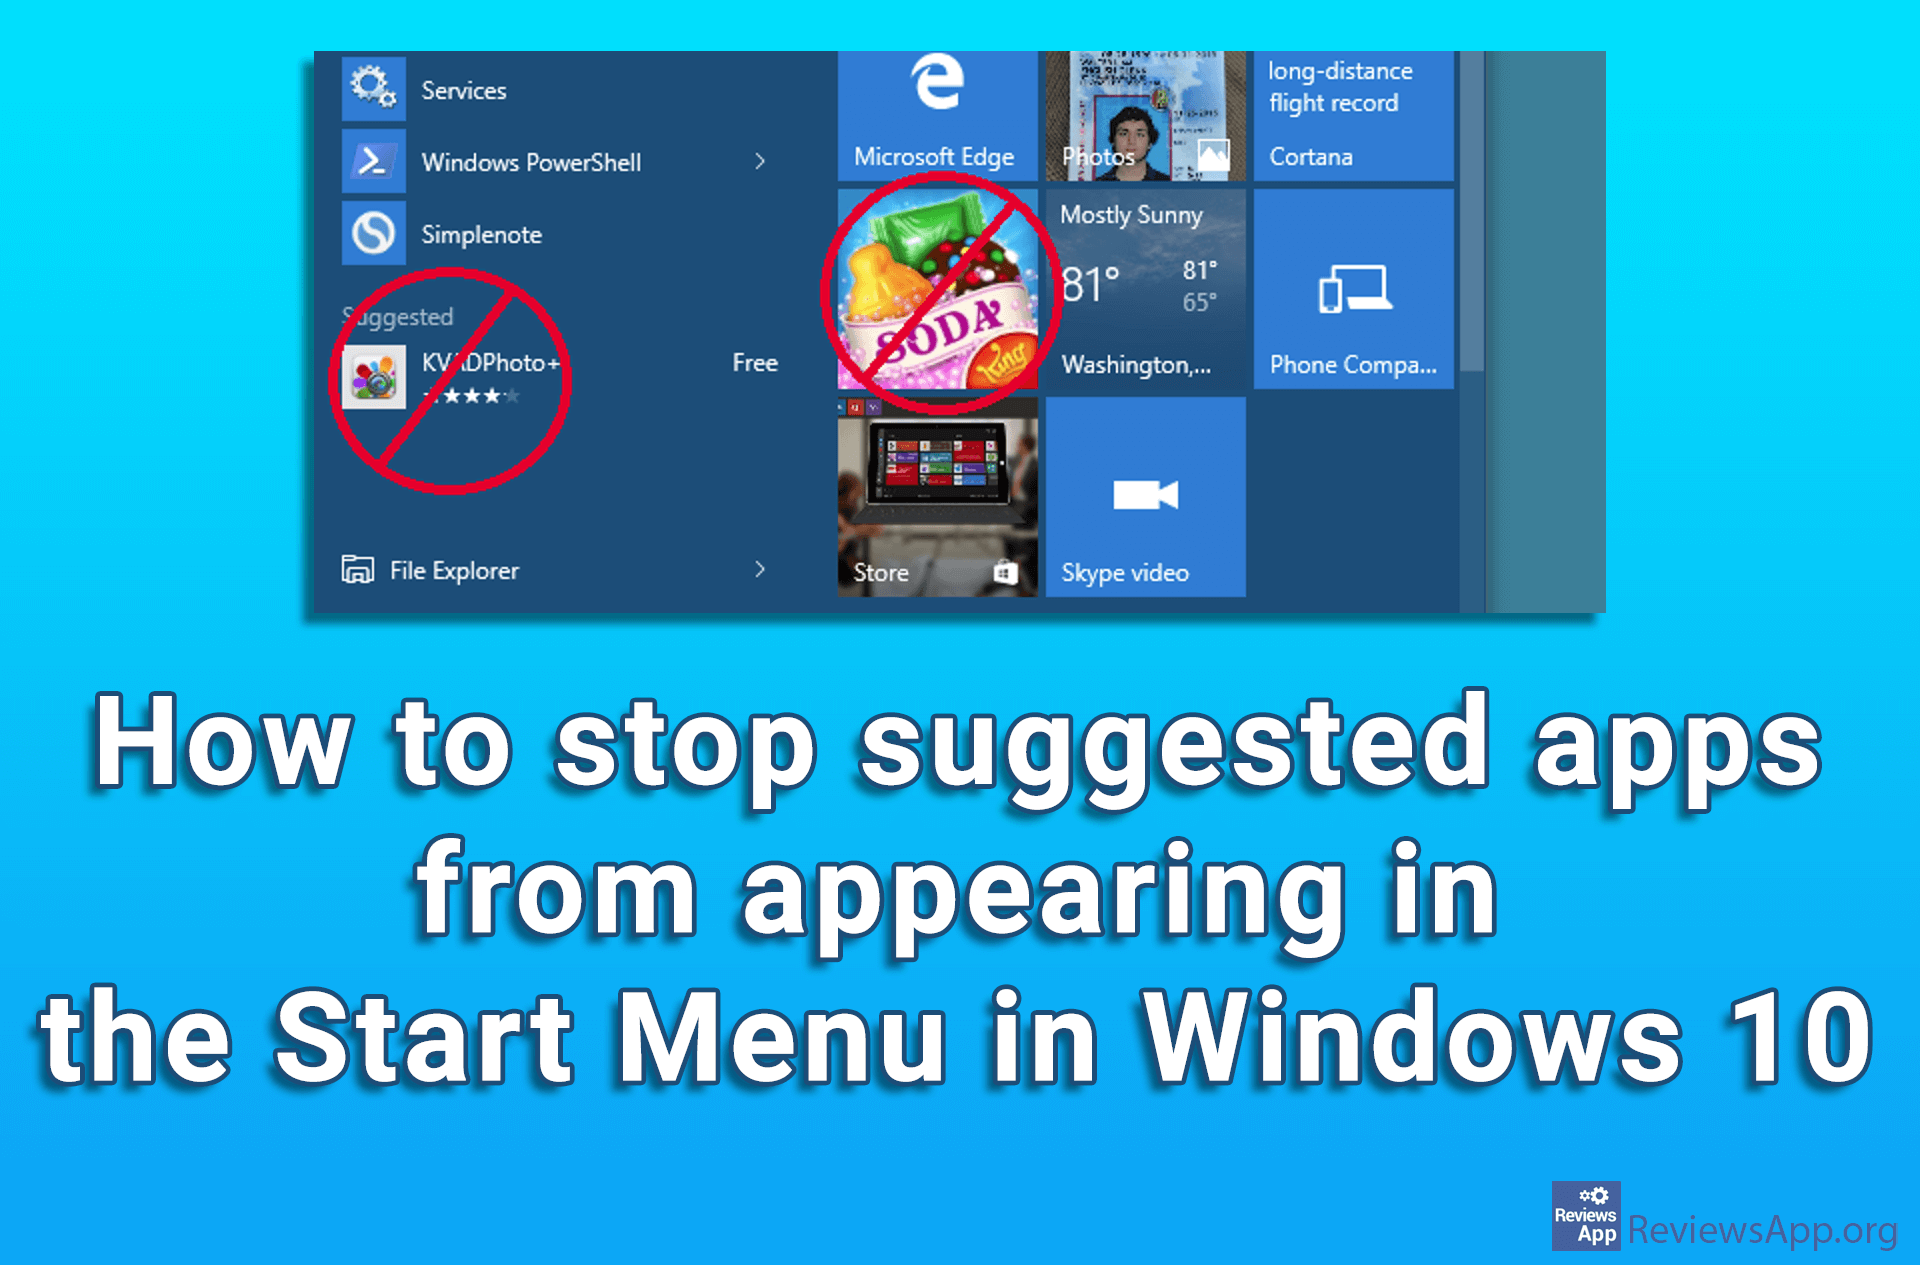 How to stop suggested apps from appearing in the Start Menu in Windows 10